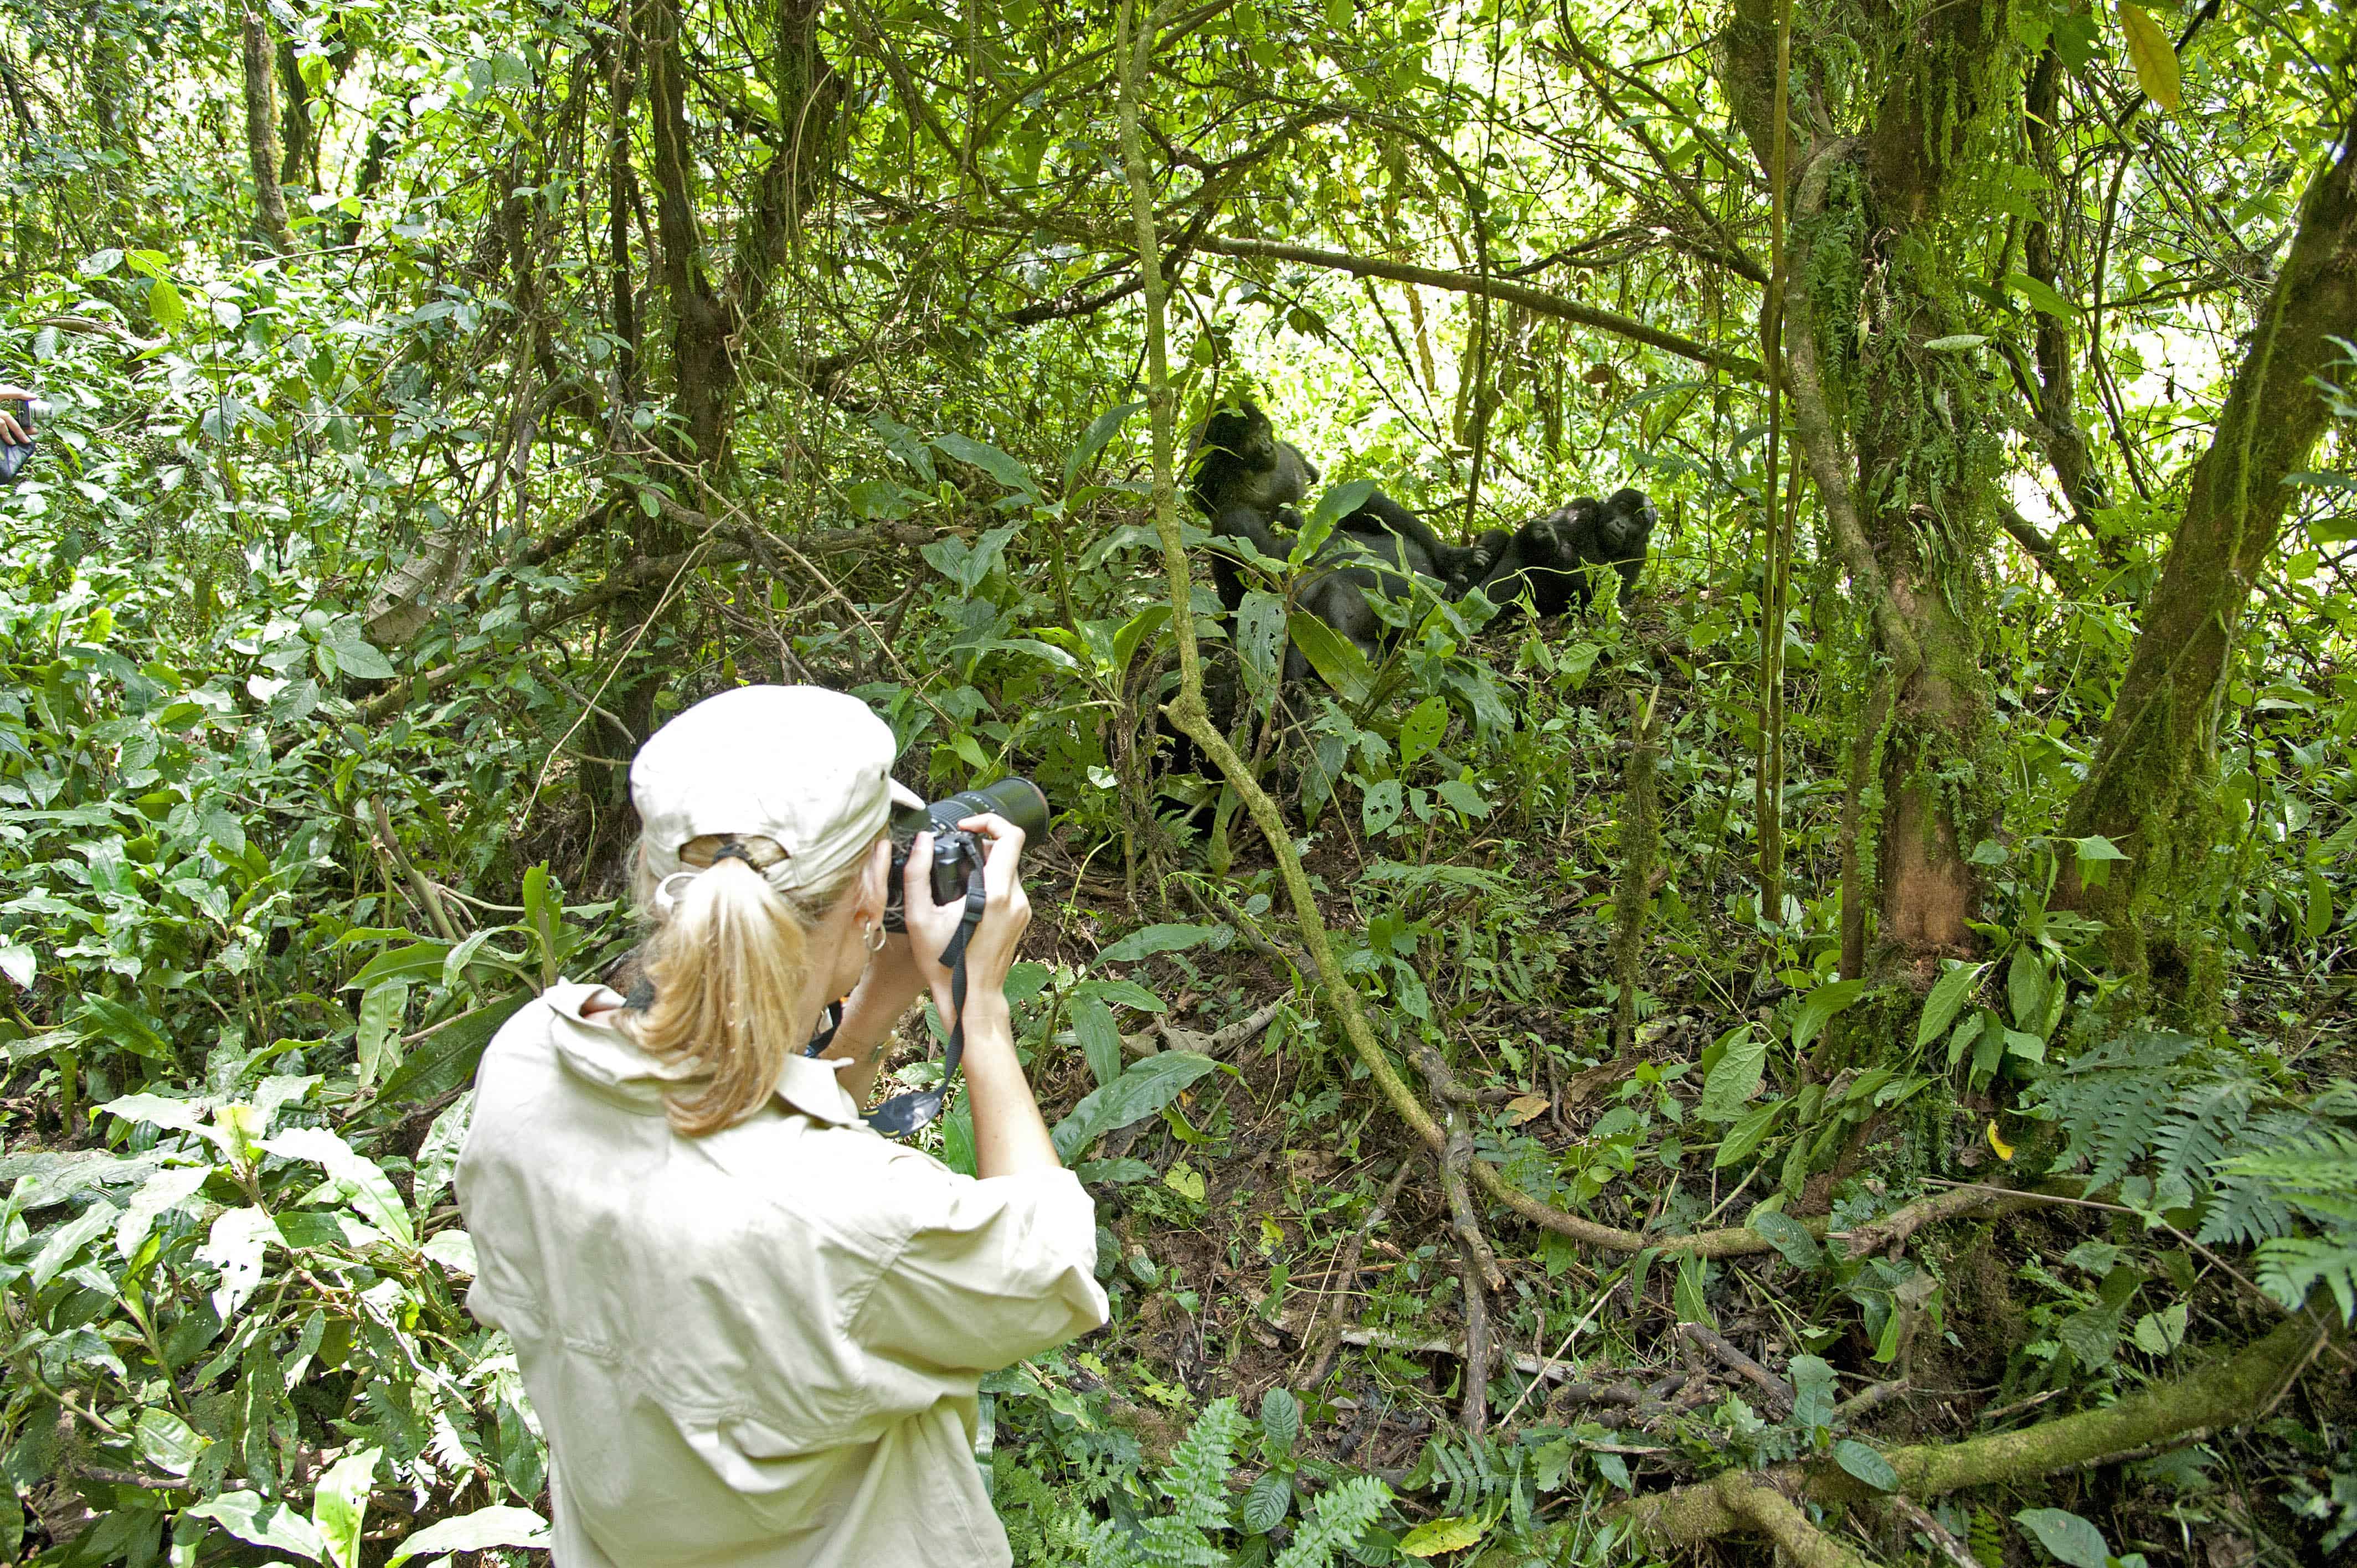 Woman taking picture of gorillas near Gorilla Forest Camp